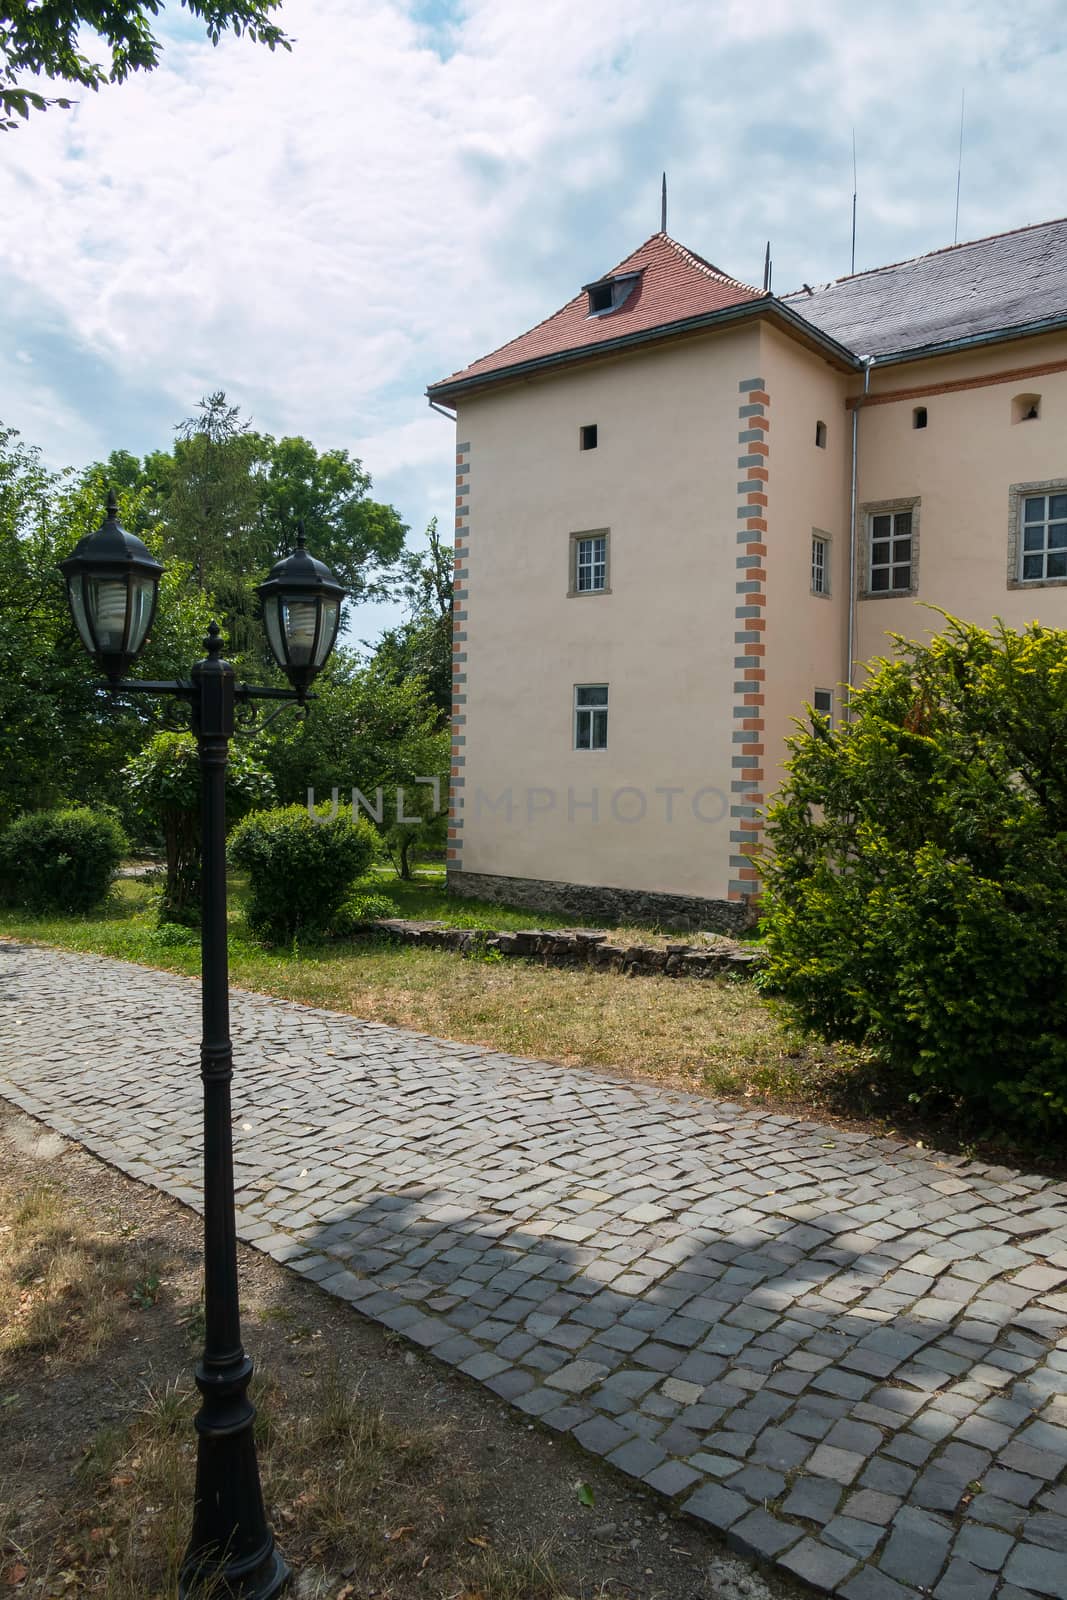 A neat lantern with two lamps standing near a path paved with a stone walking near a beautiful building.